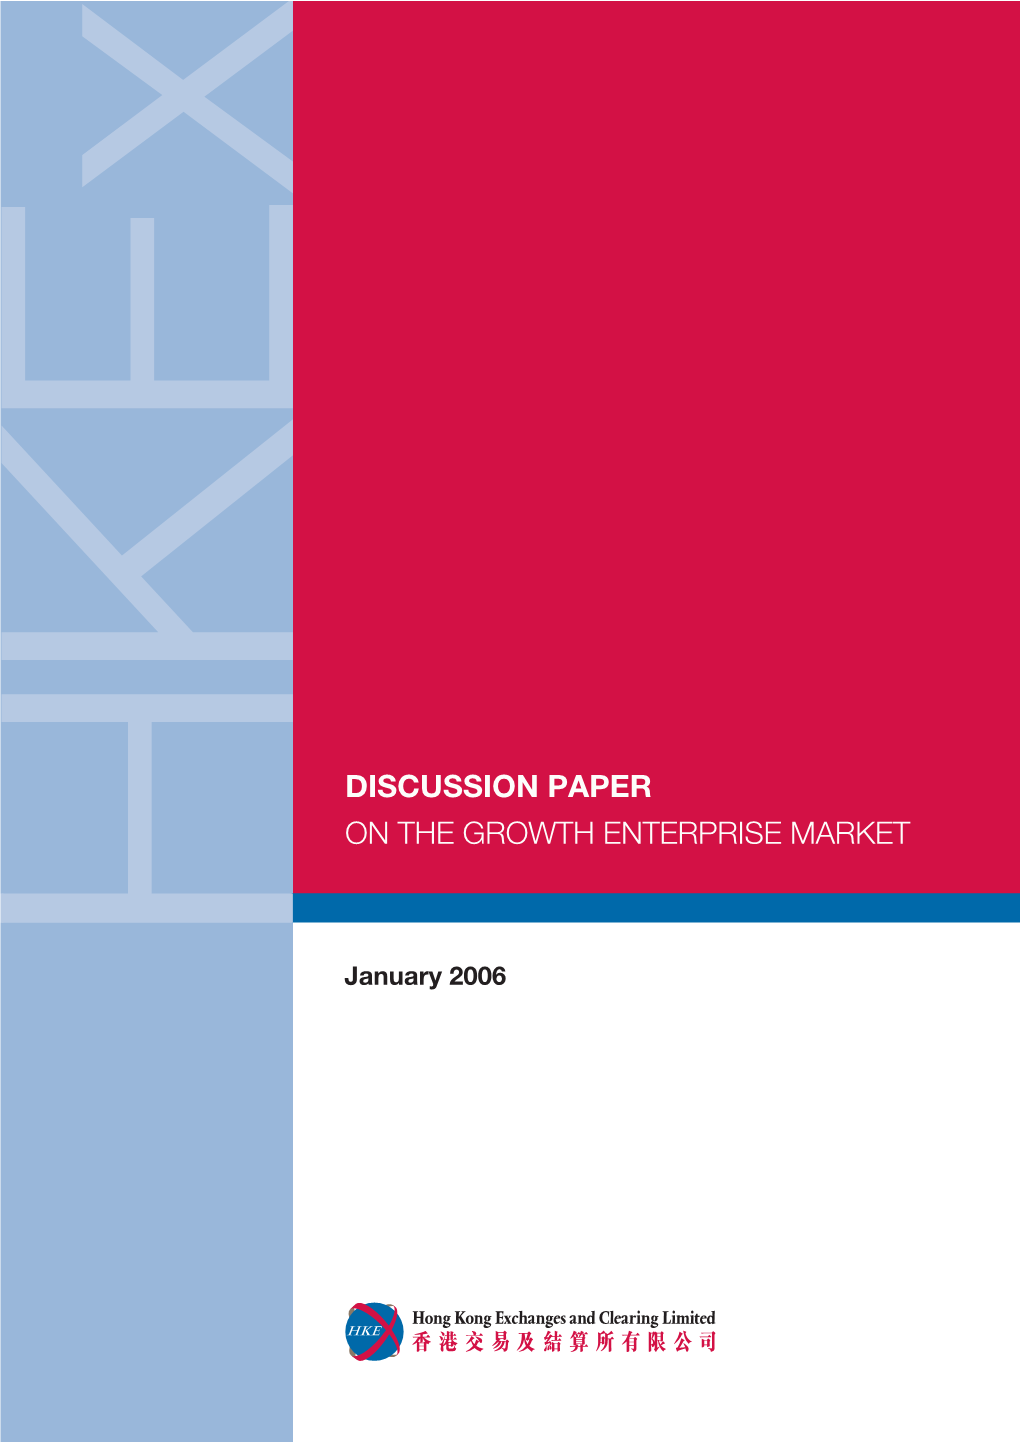 Discussion Paper on the Growth Enterprise Market